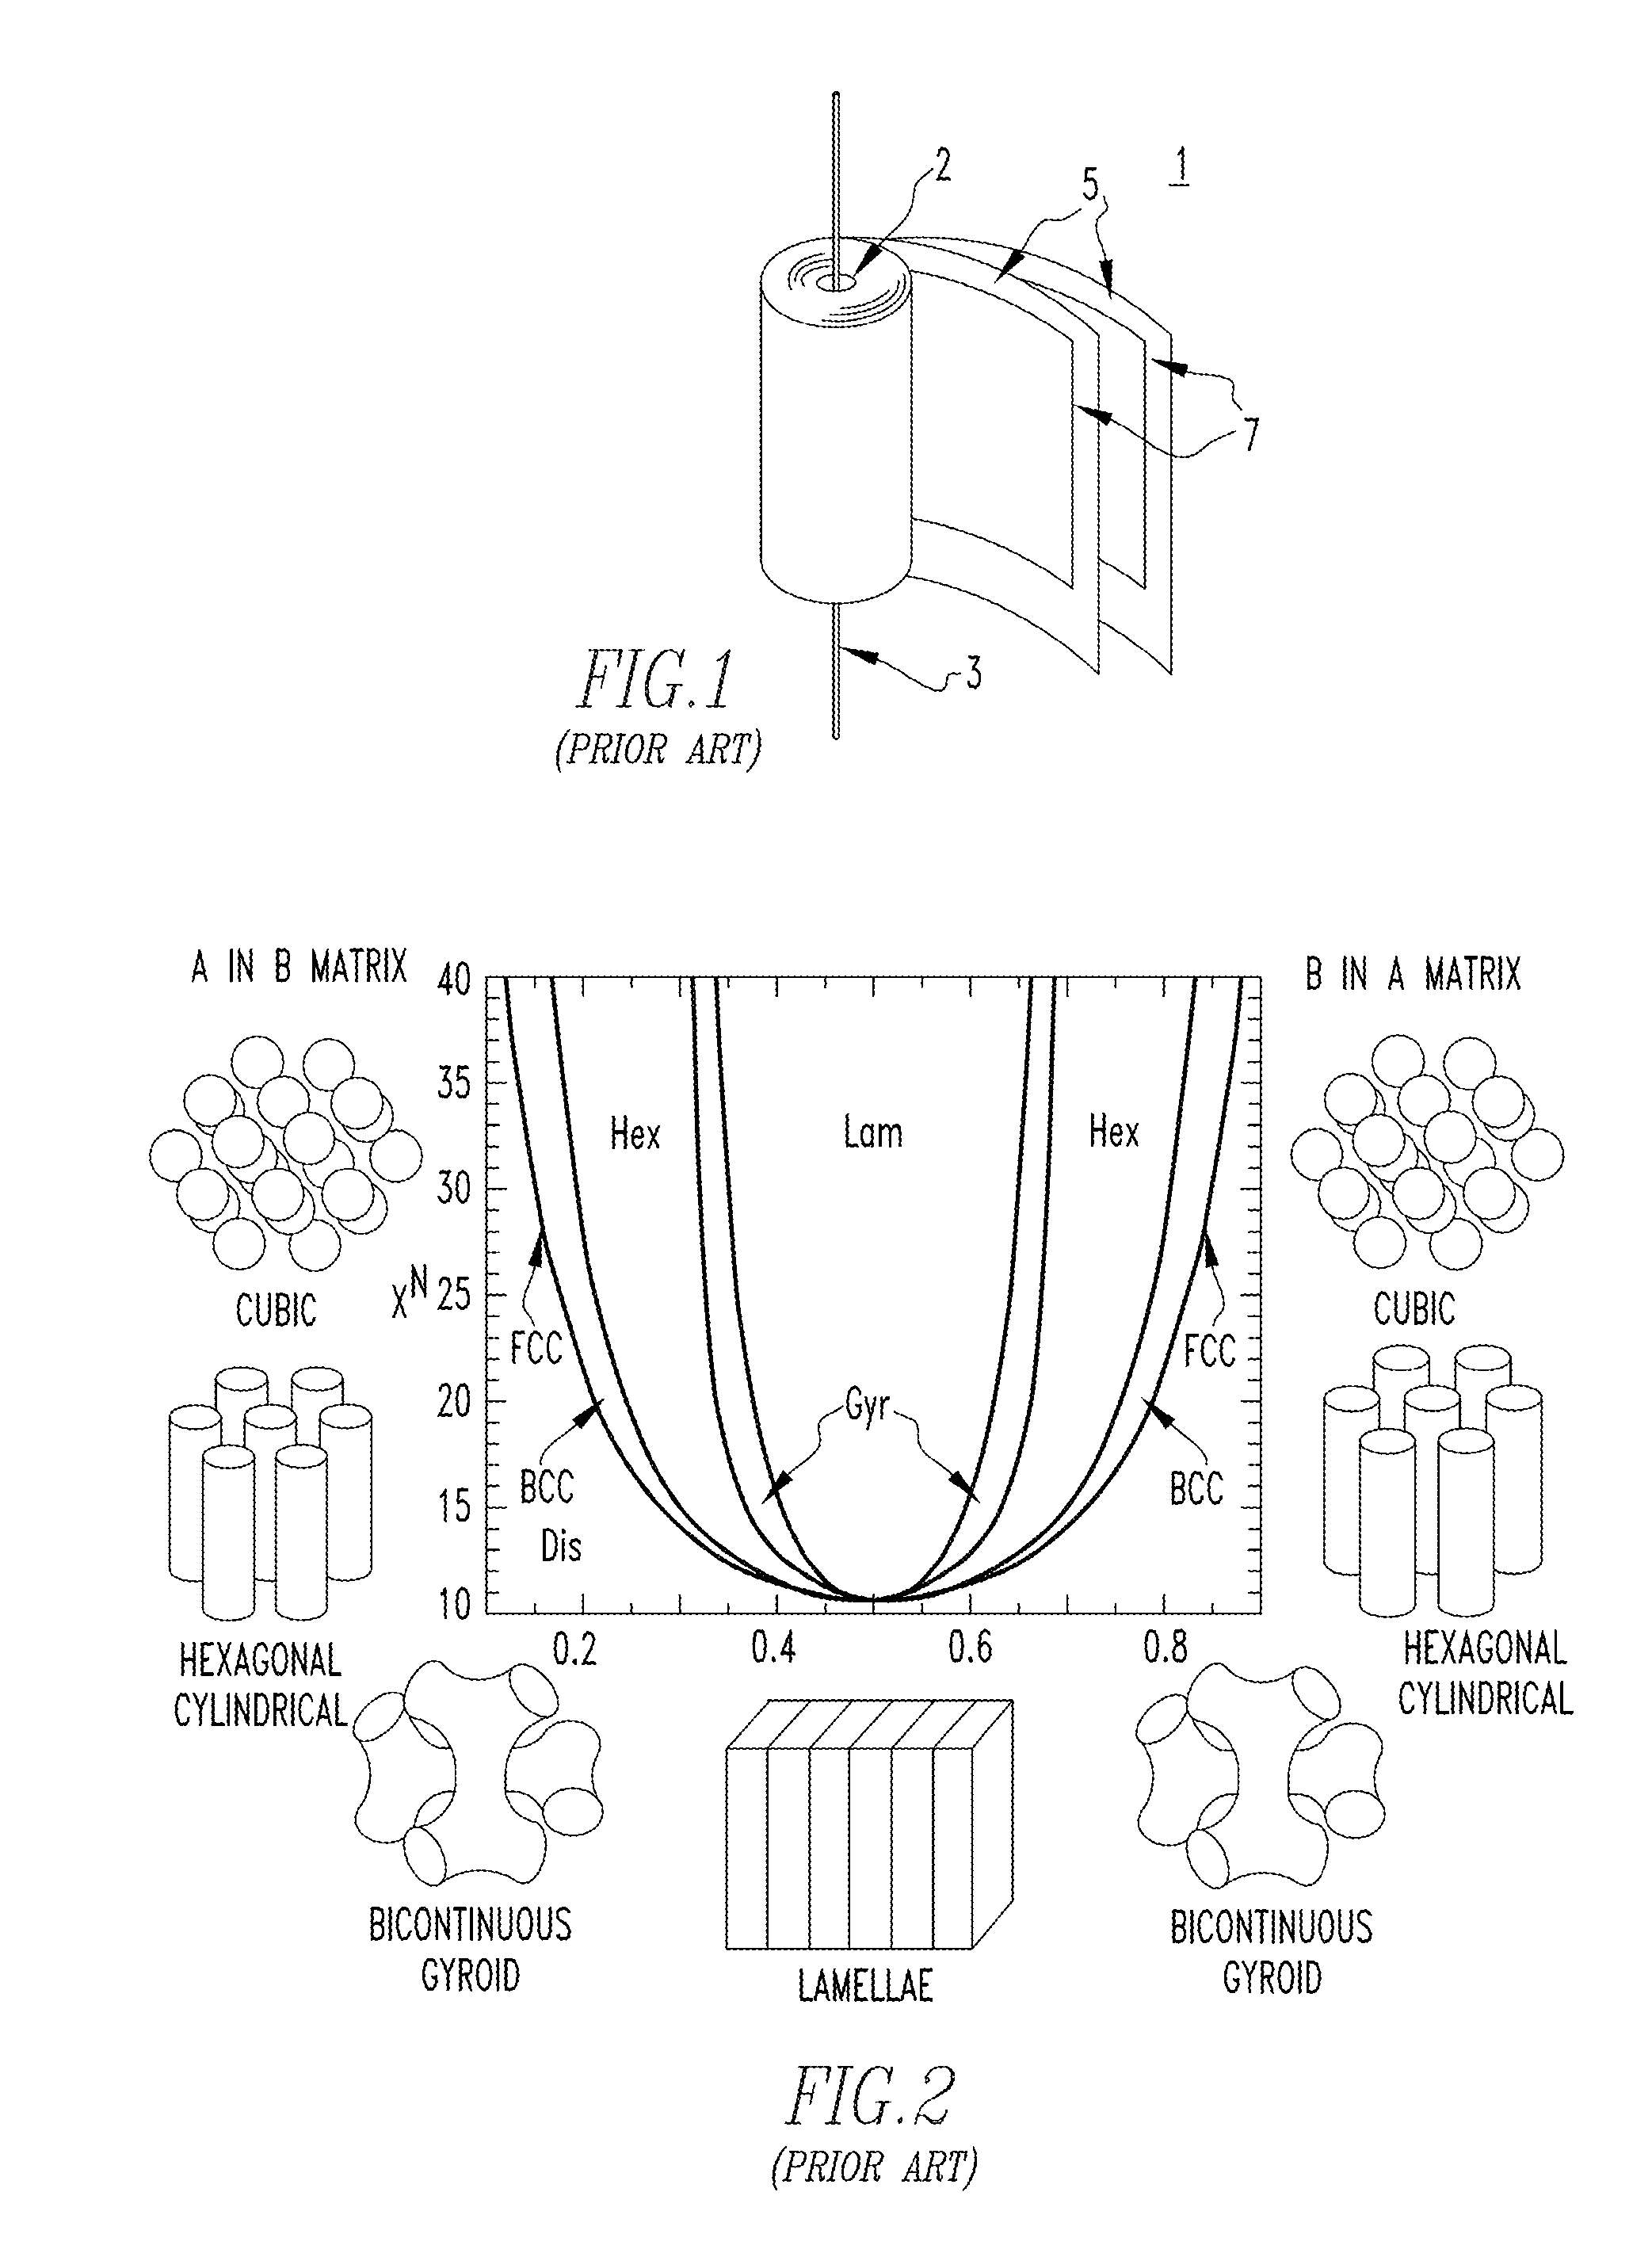 Multi-layer dielectric film with nanostructured block copolymer